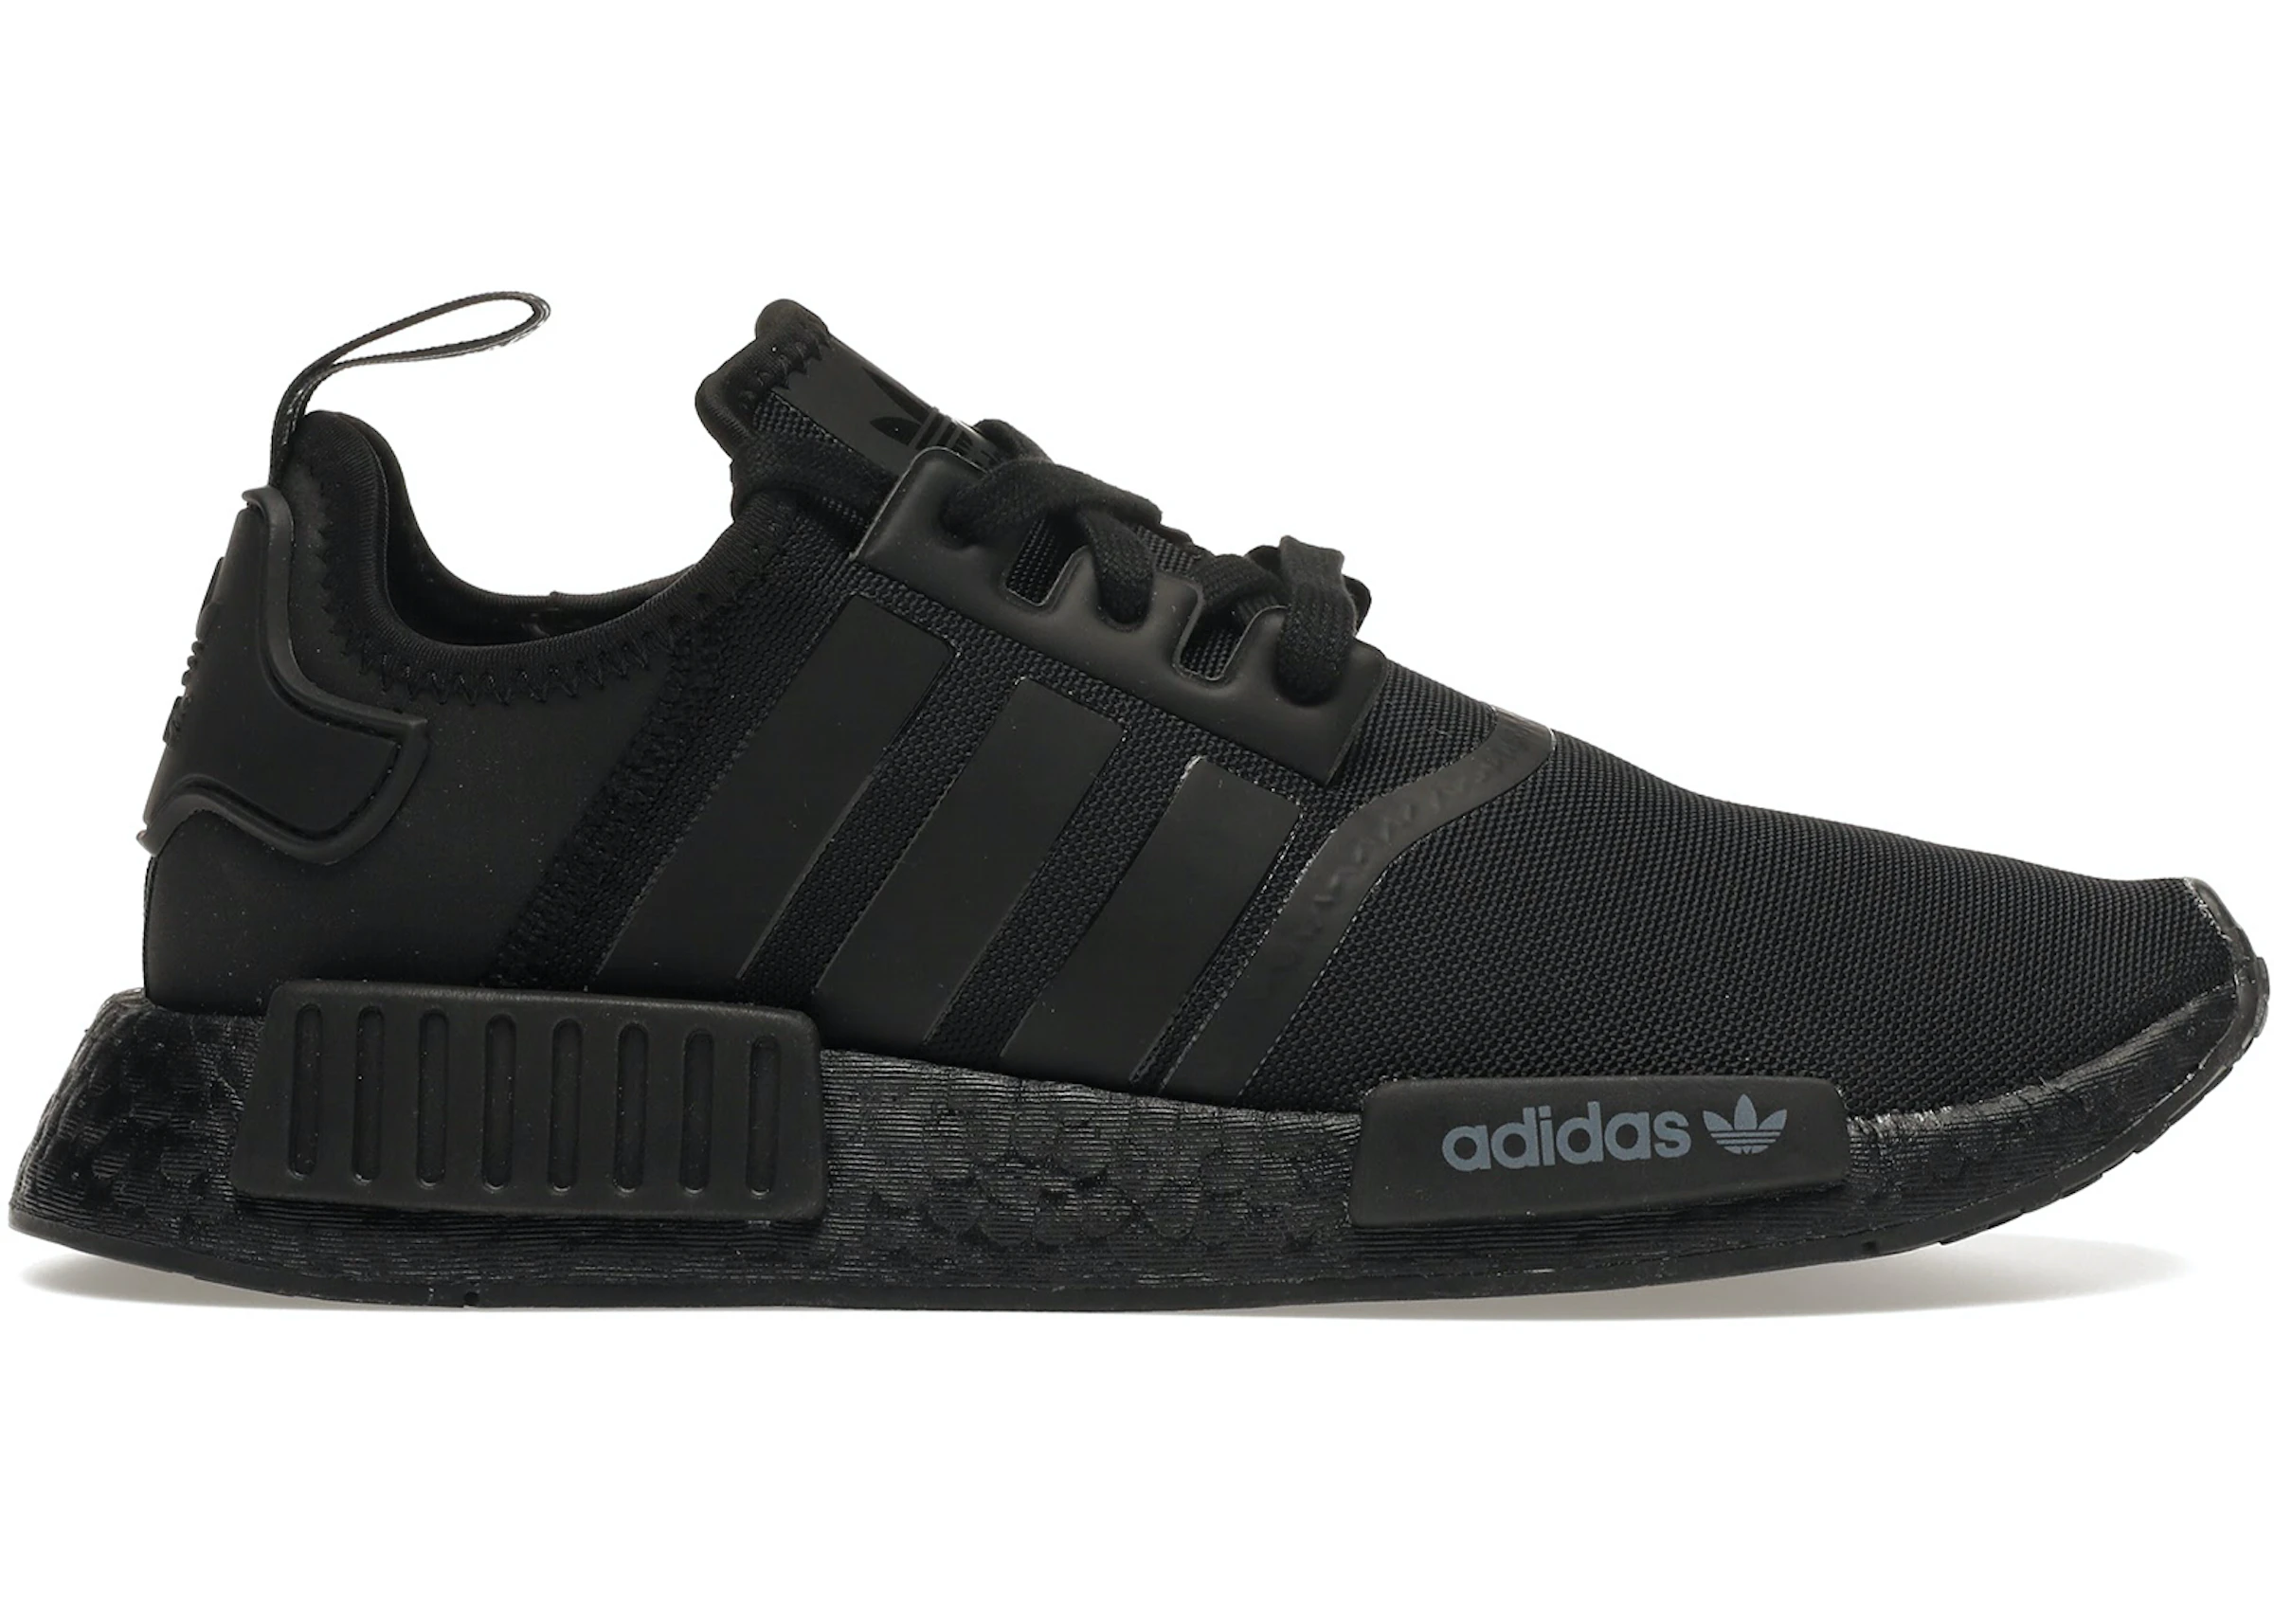 adidas NMD - All Sizes Colorways at StockX